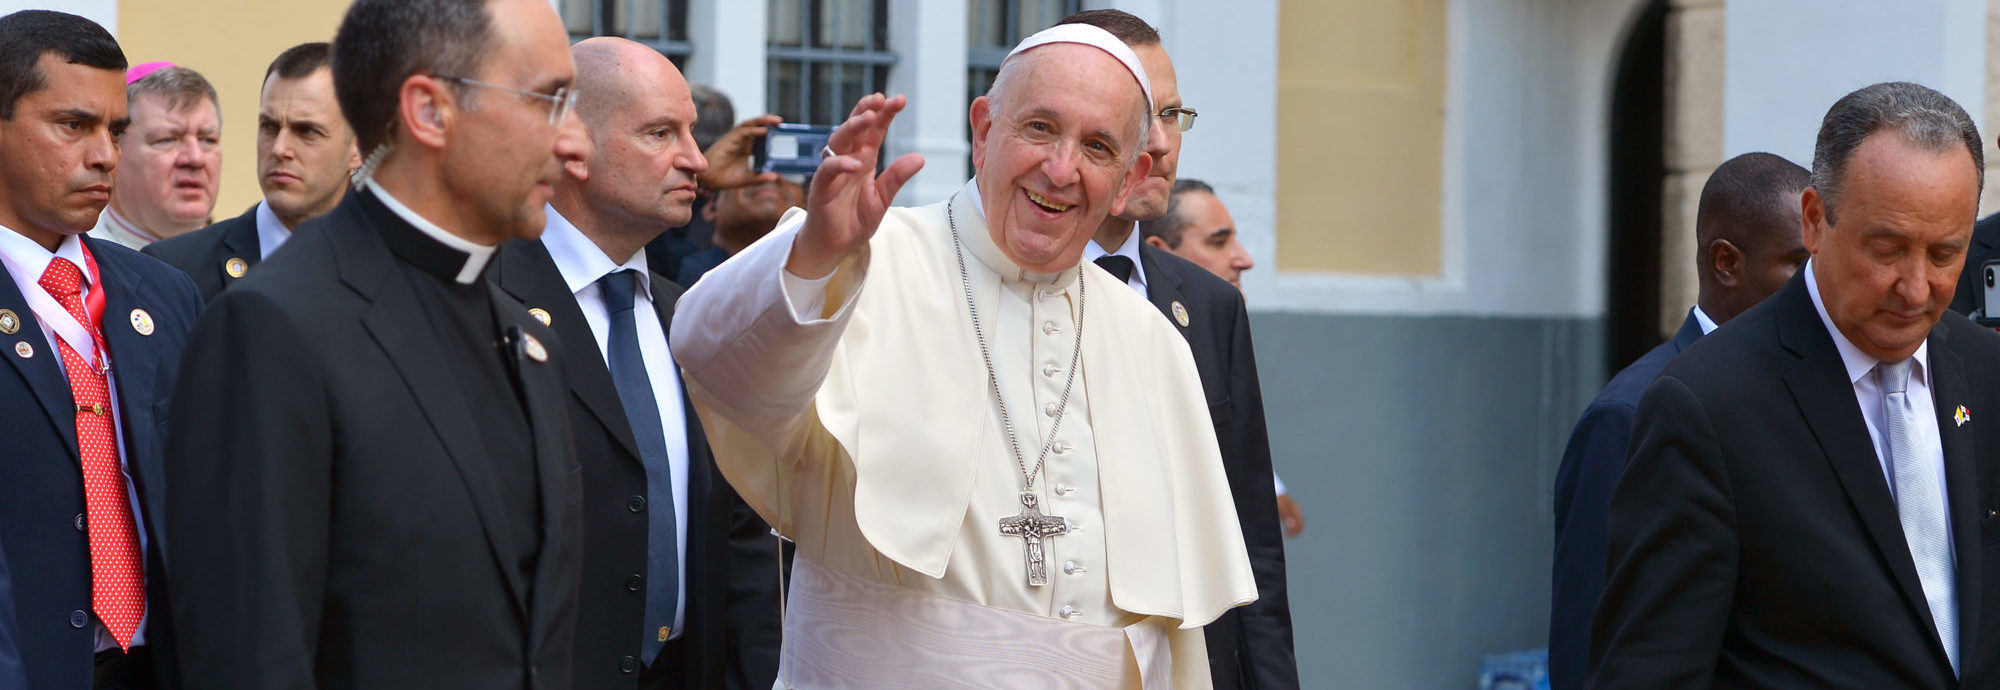 Pope Francis is Wrong about the Morality of Nuclear Weapons